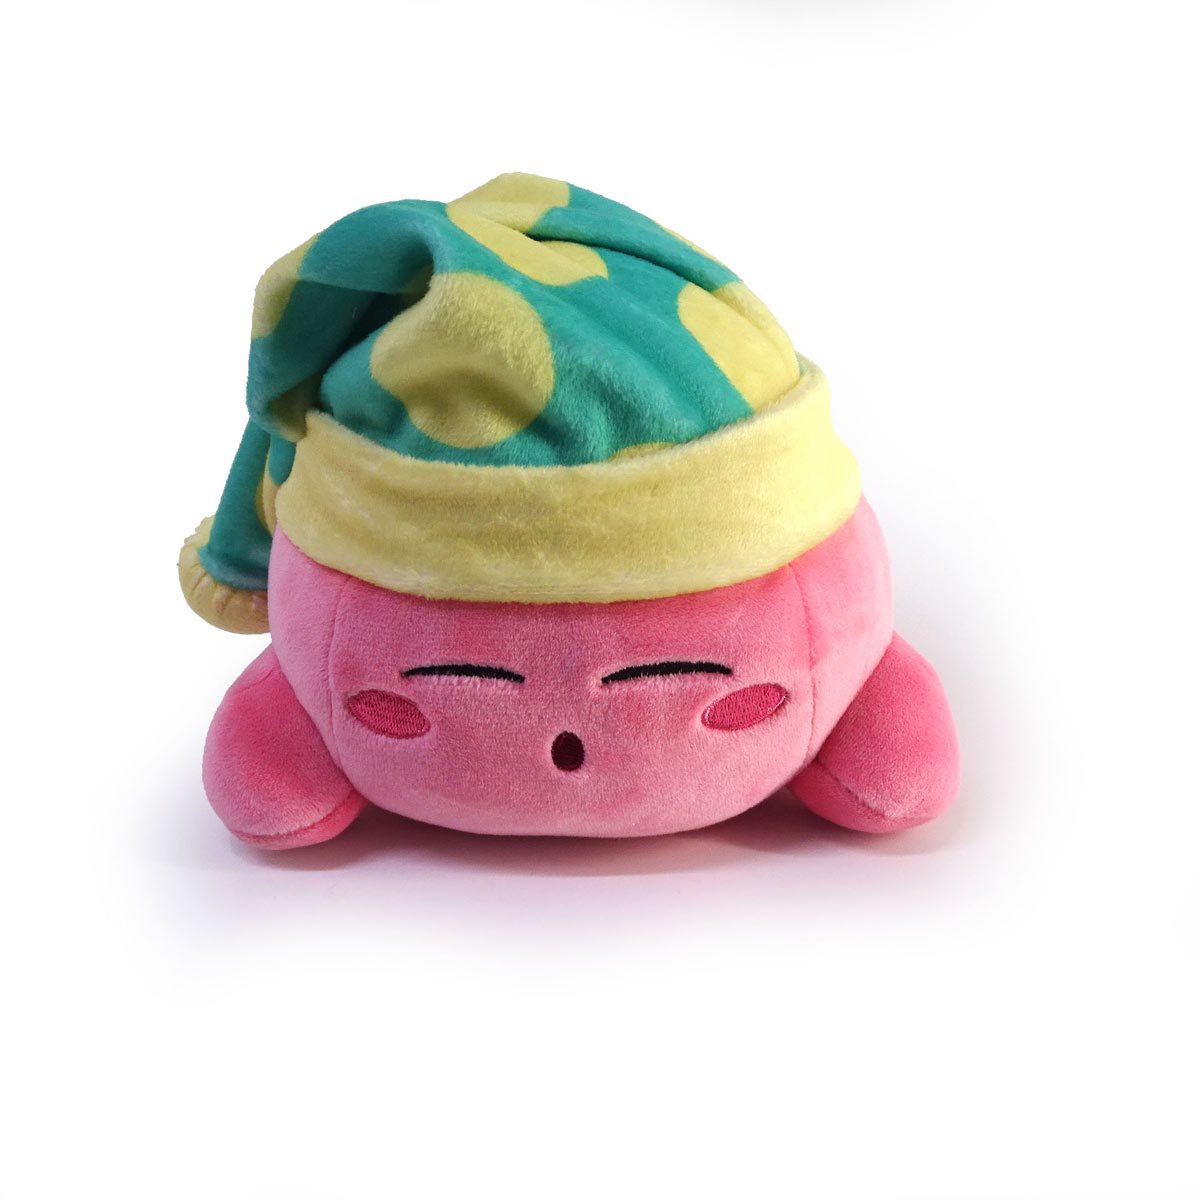 Kirby and Friend Heart Junior Plush Toy Club Mocchi-Mocchi 6 inch 